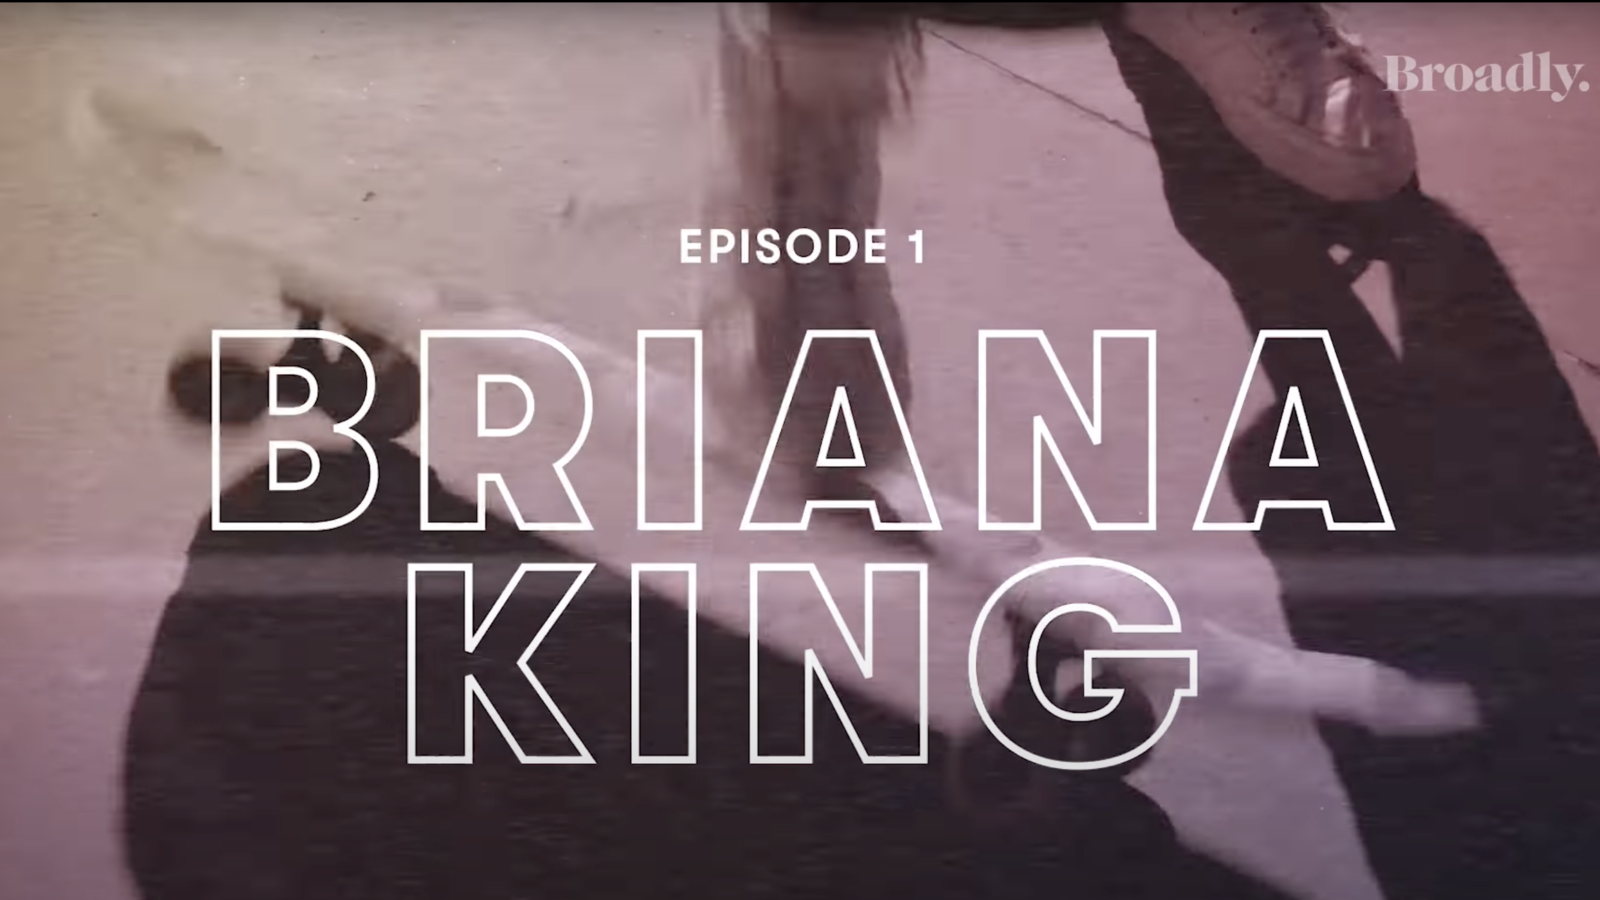 text saying "episode 1: brianna king" against a still image of a person riding a skate board